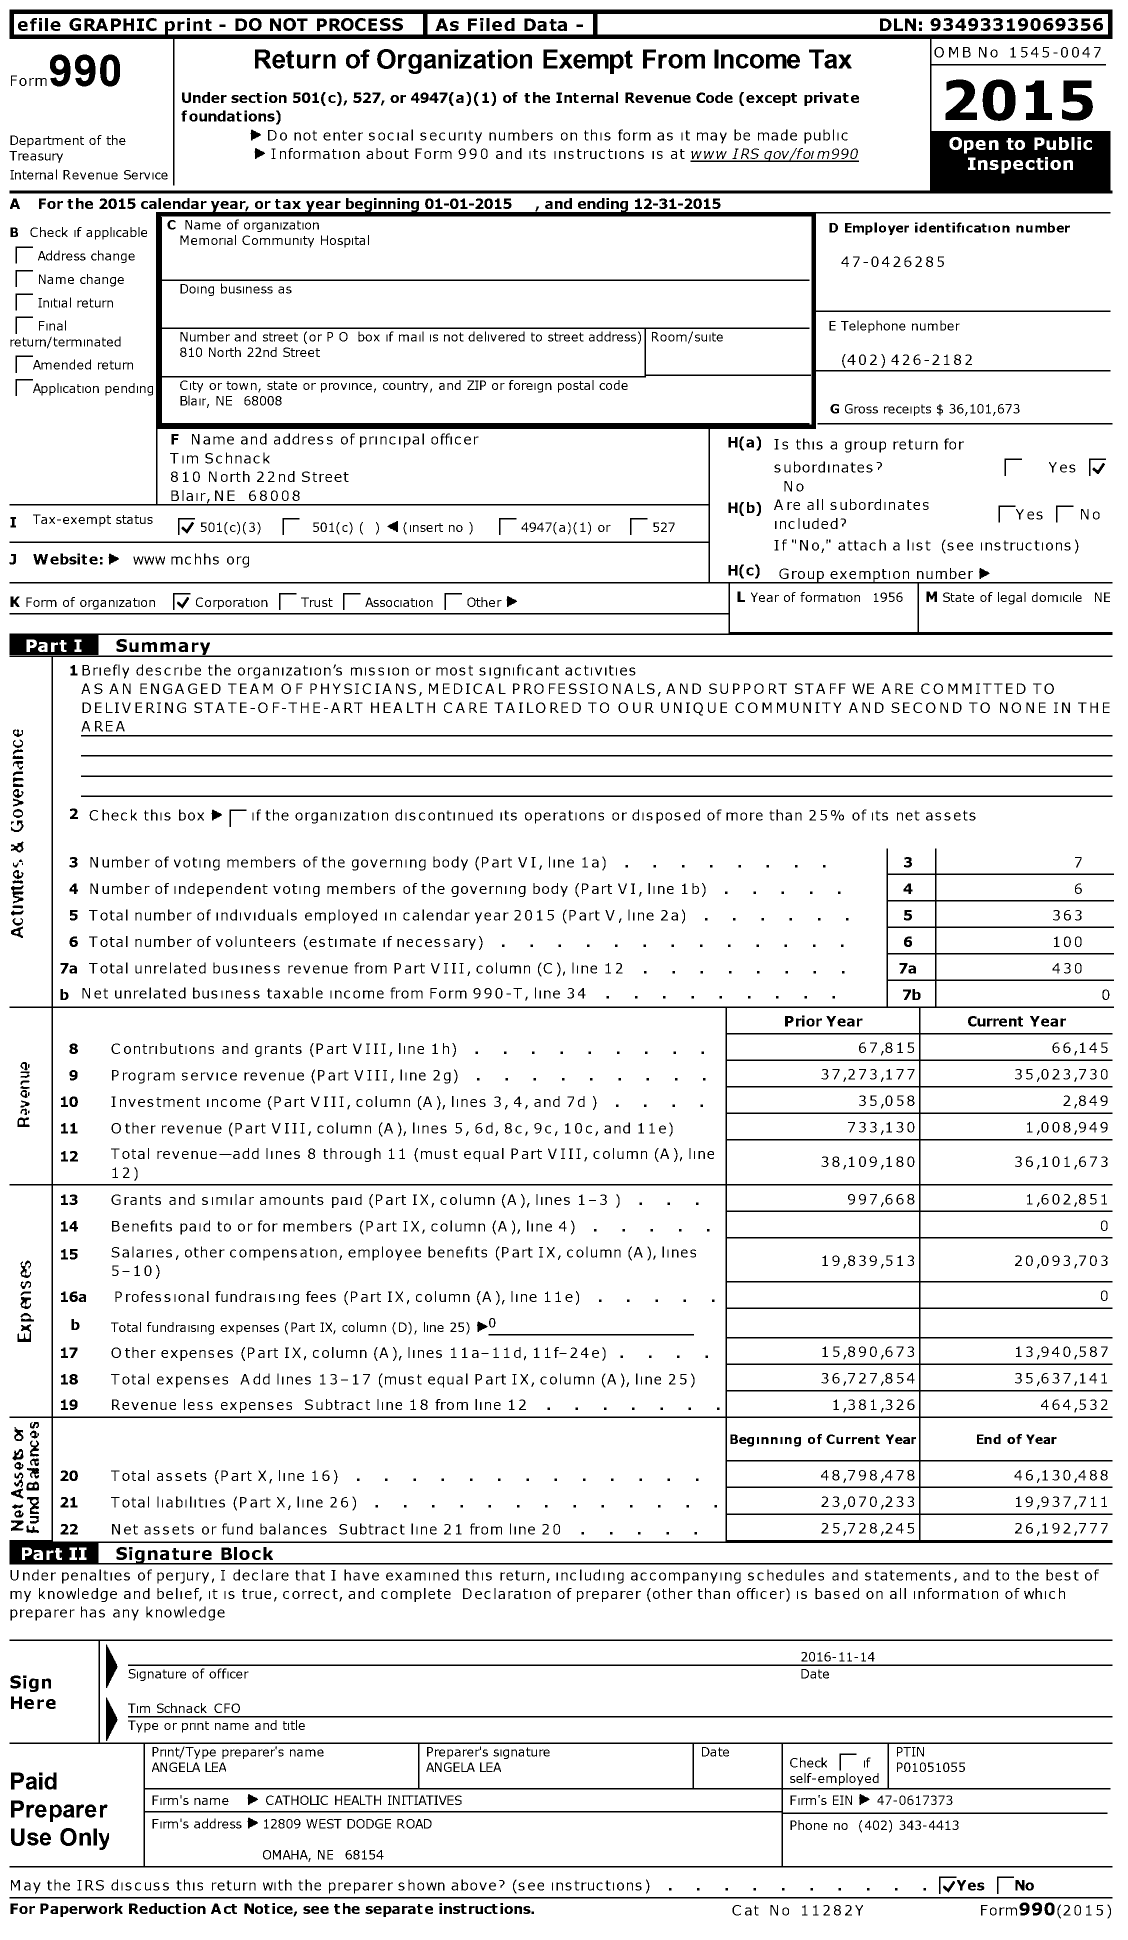 Image of first page of 2015 Form 990 for Memorial Community Hospital (MCH&HS)